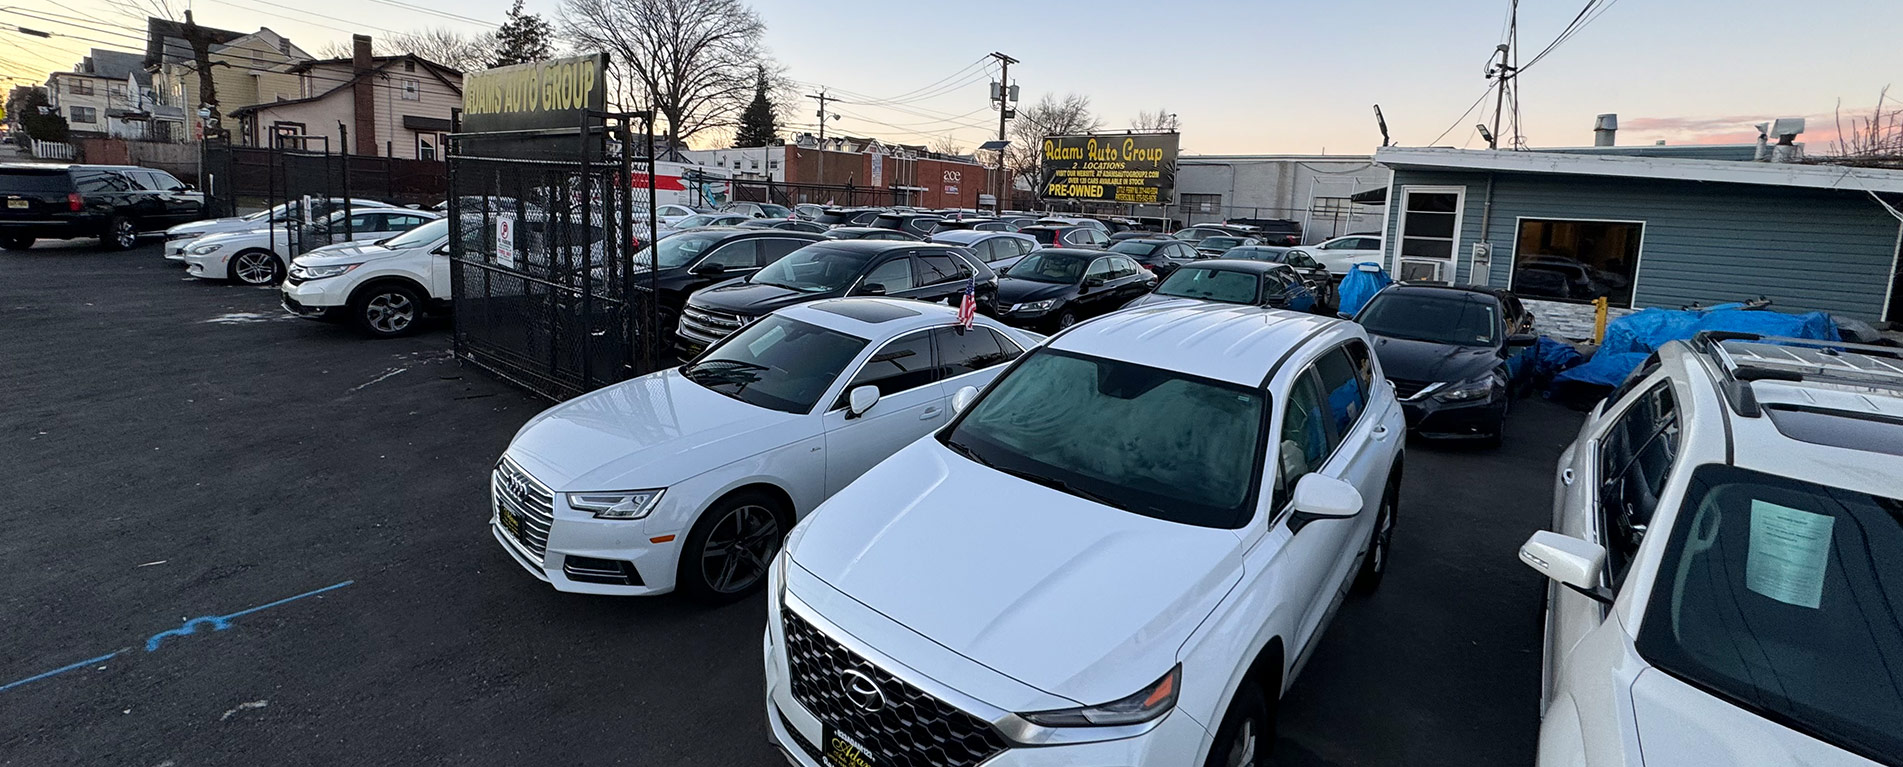 Used cars for sale in Paterson | Adams Auto Group. Paterson NJ